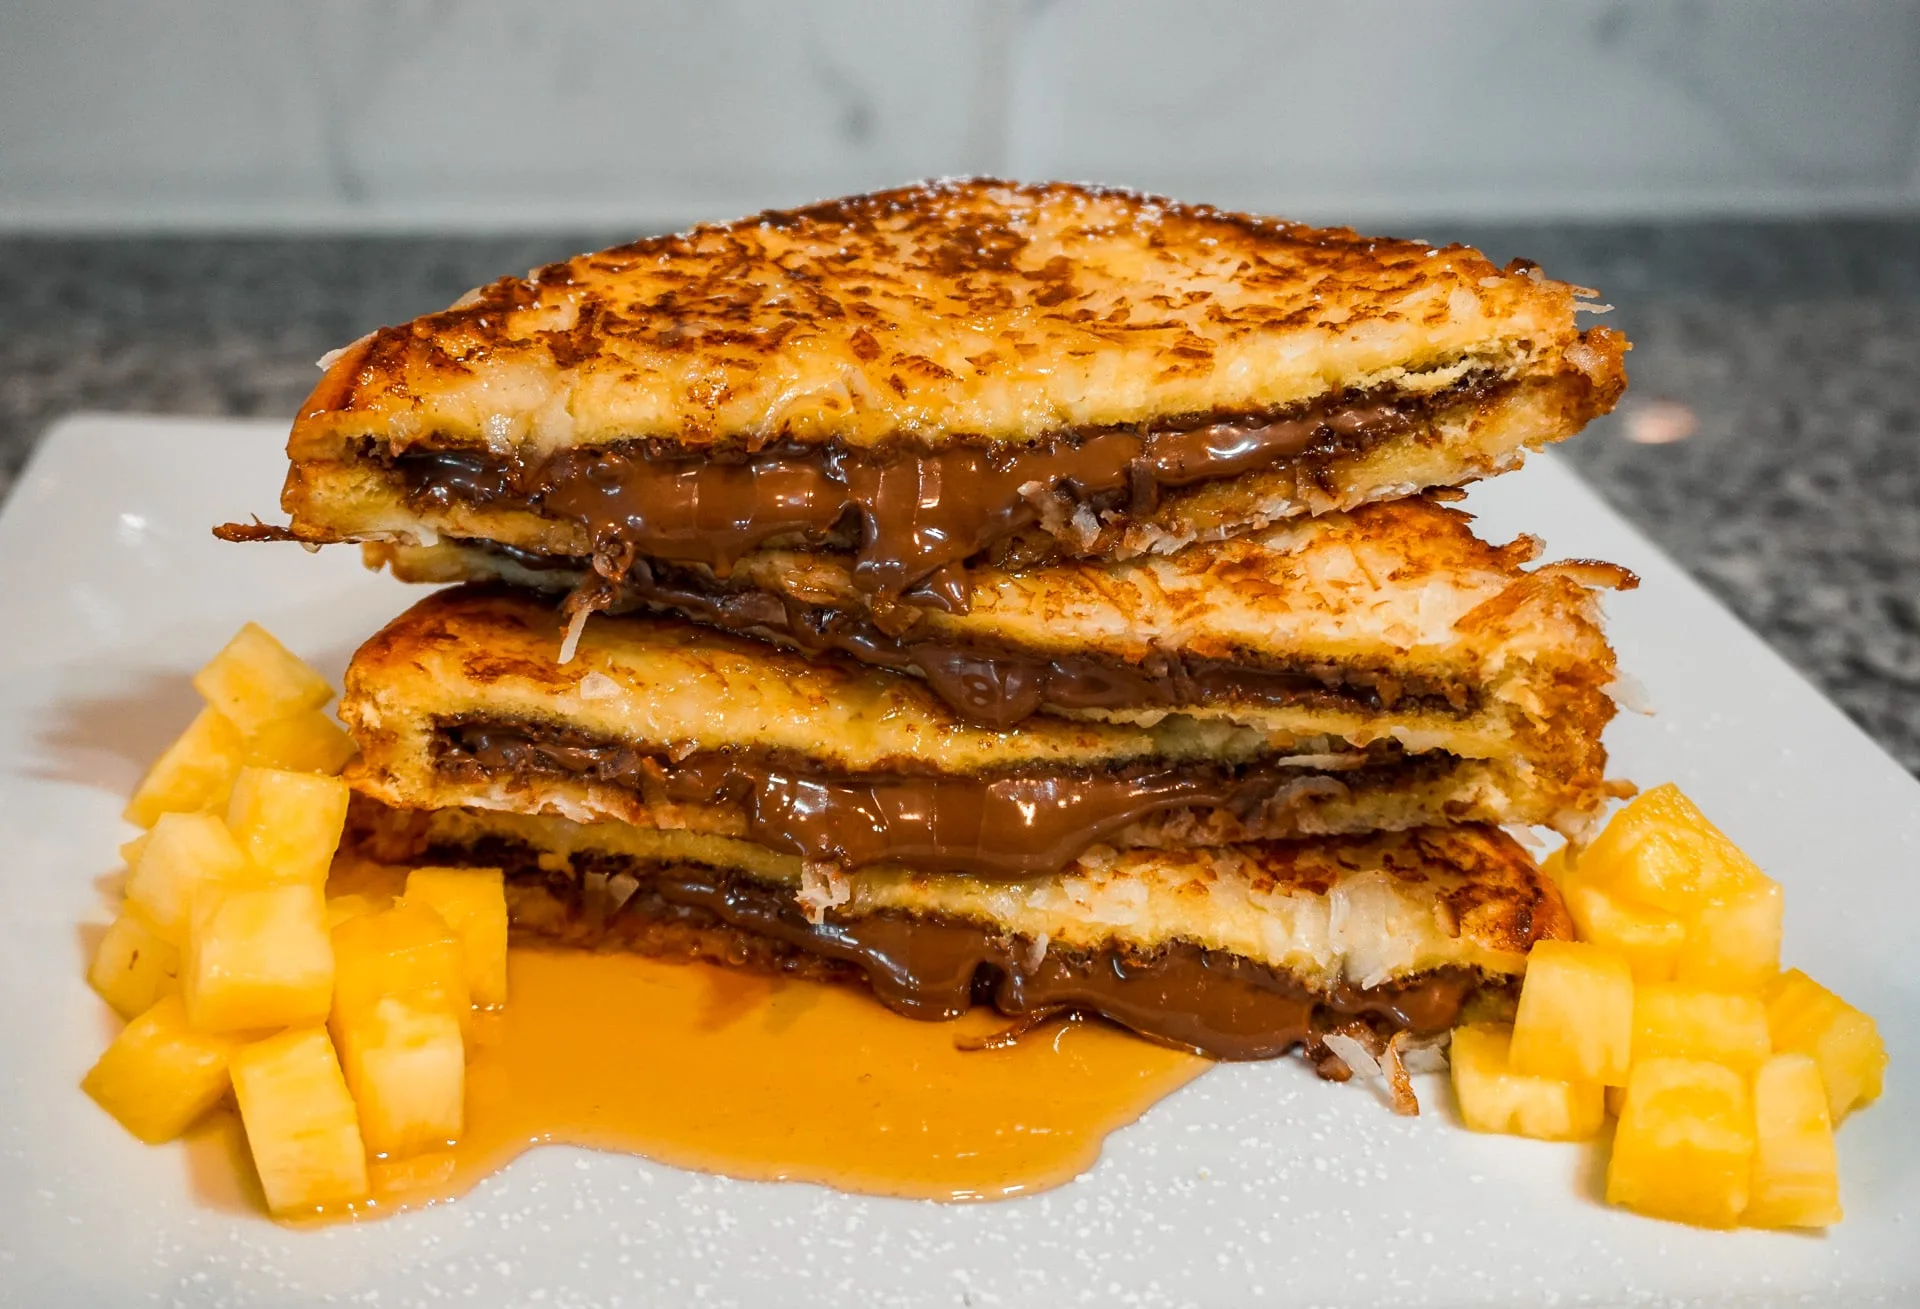 https://www.oursweetadventures.com/wp-content/uploads/2020/04/Nutella-French-Toast-with-Syrup-4.jpg.webp